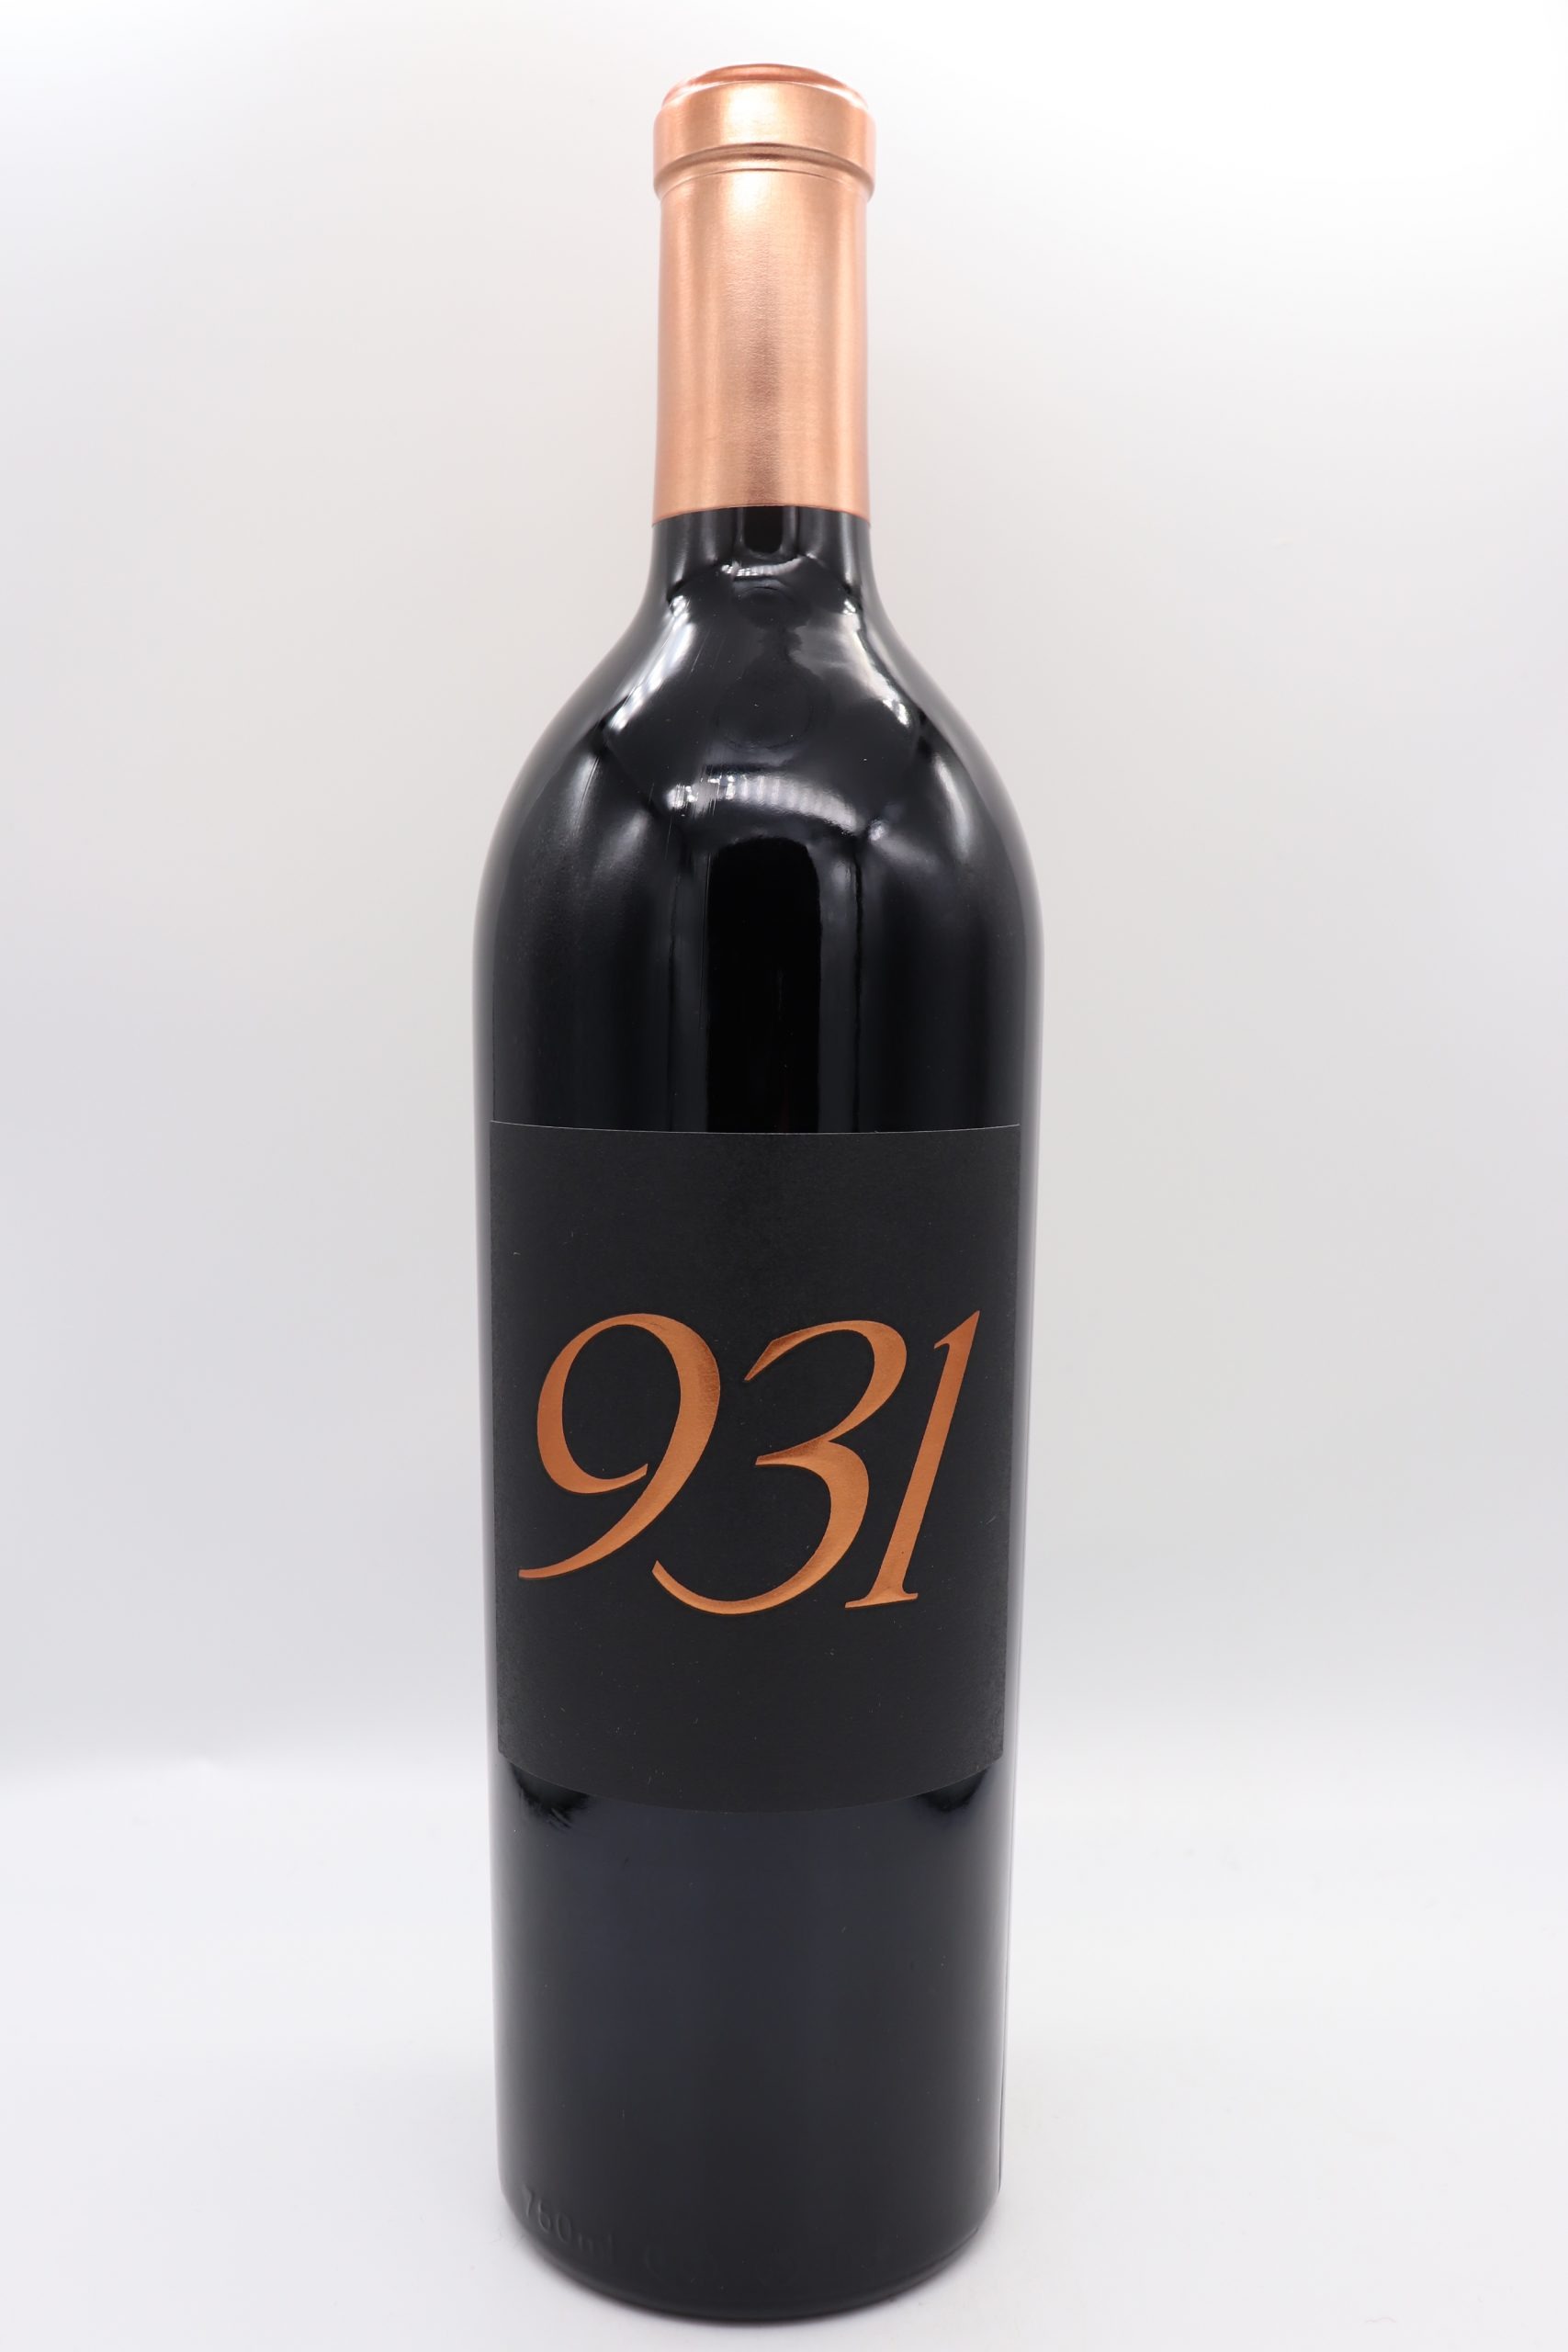 Product Image for Varozza 931 Red Blend 